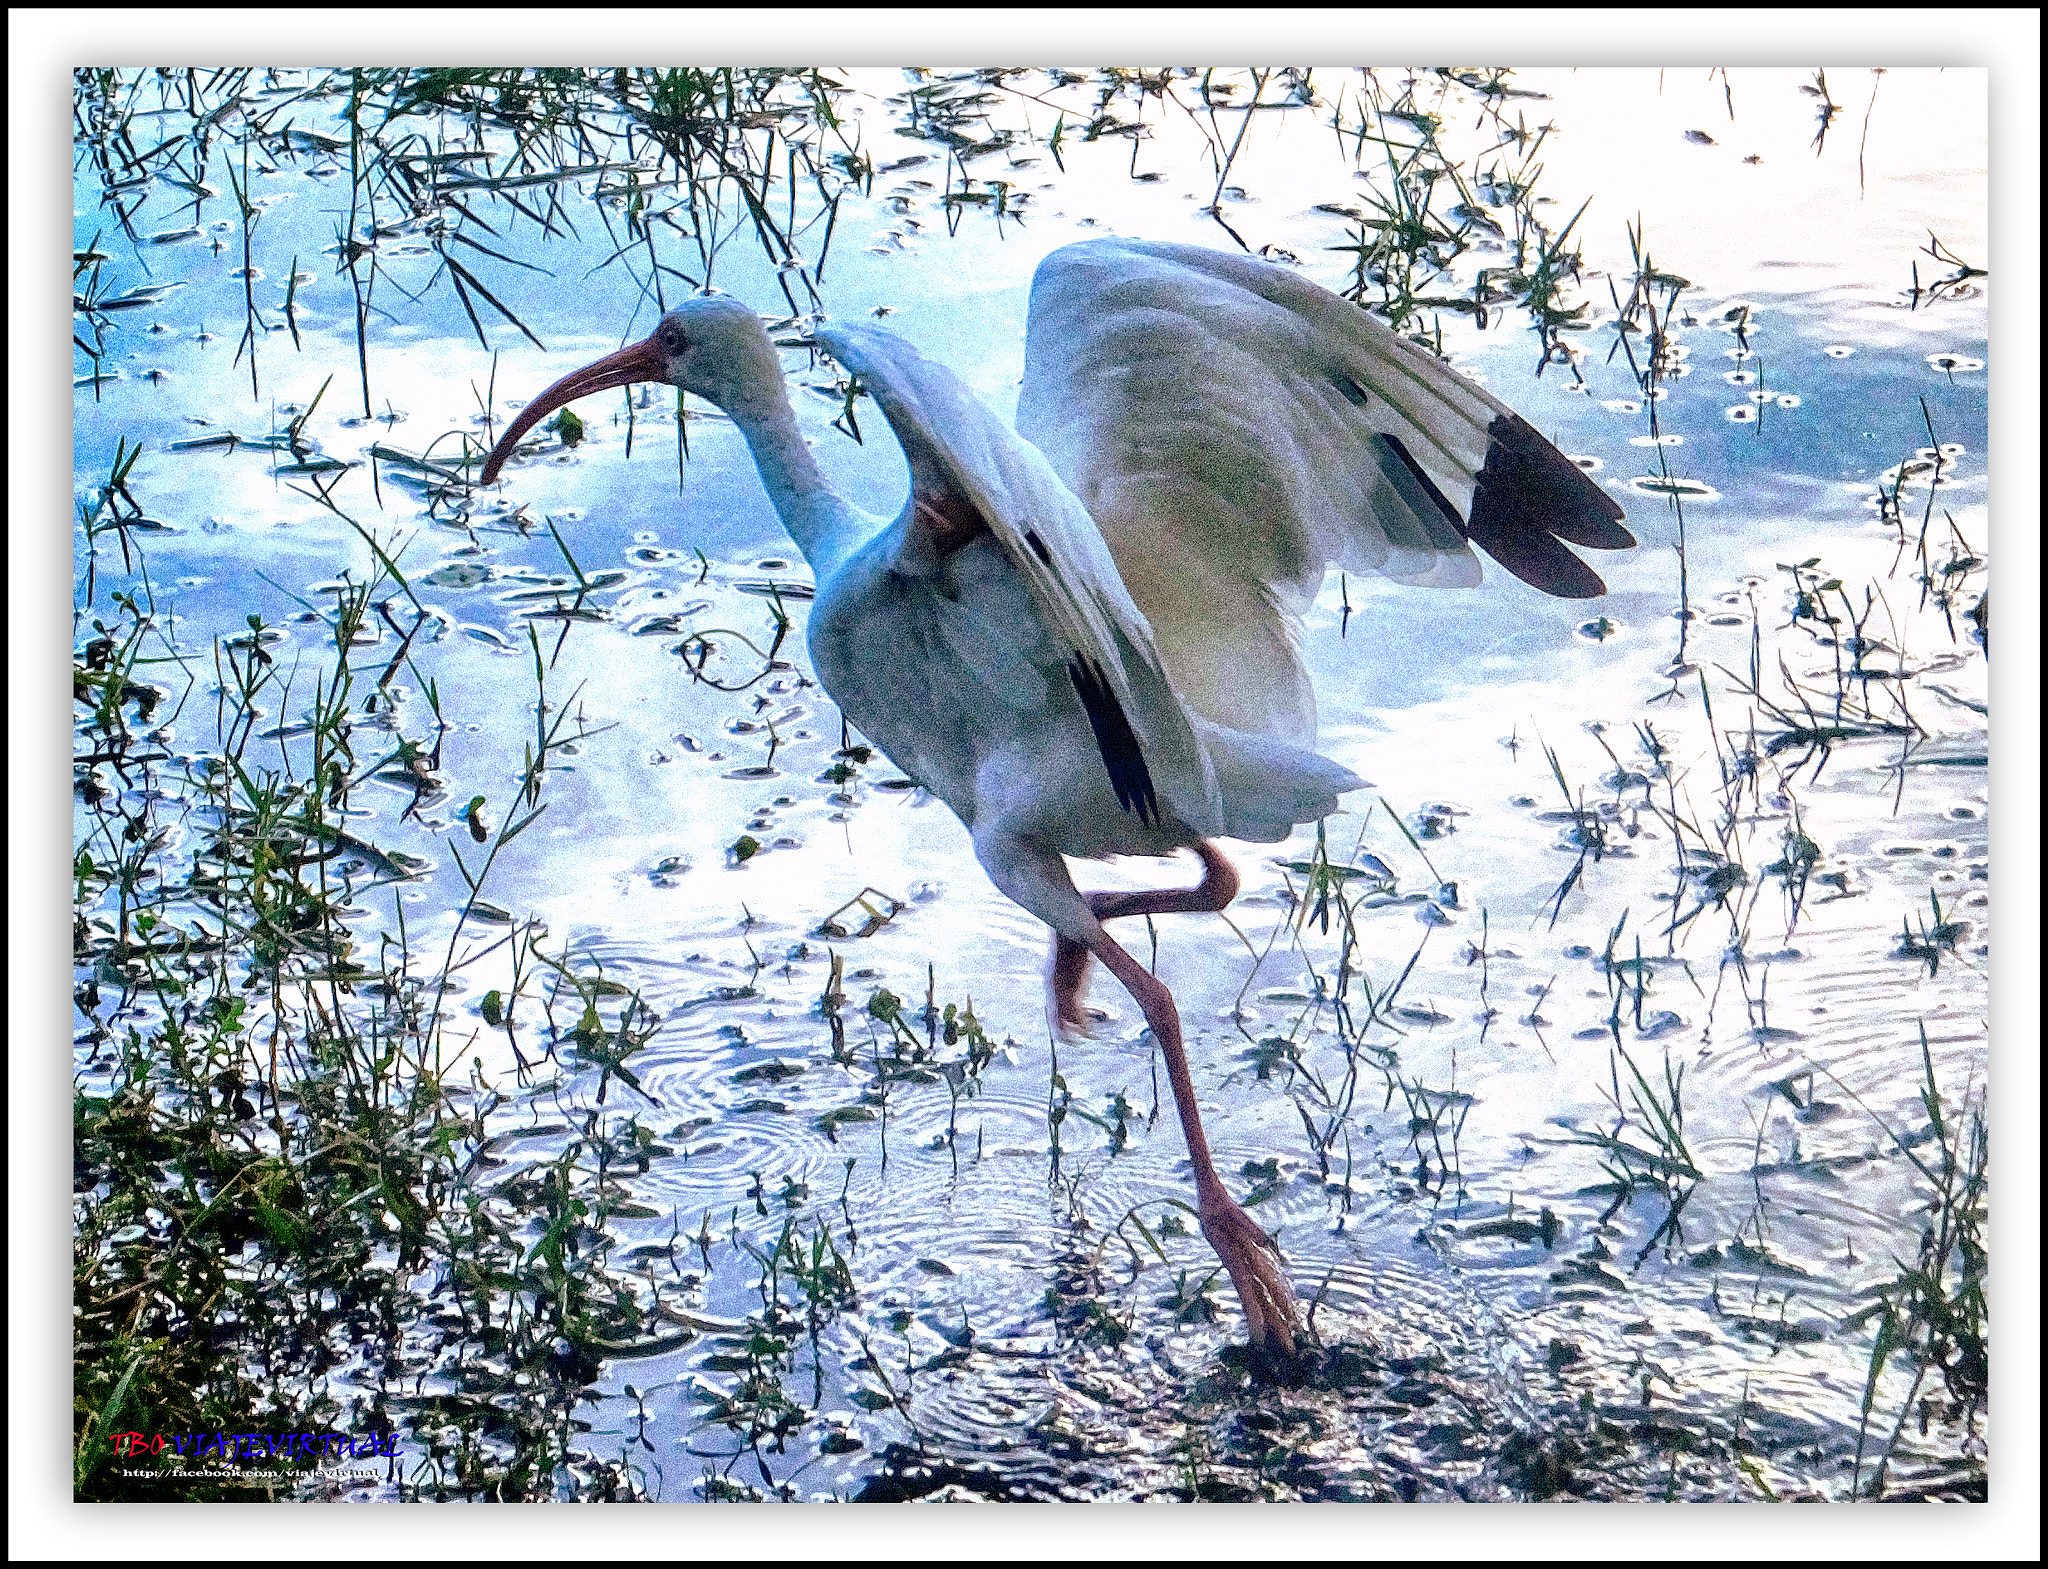 Fujifilm FinePix F850EXR sample photo. American withe ibis photography